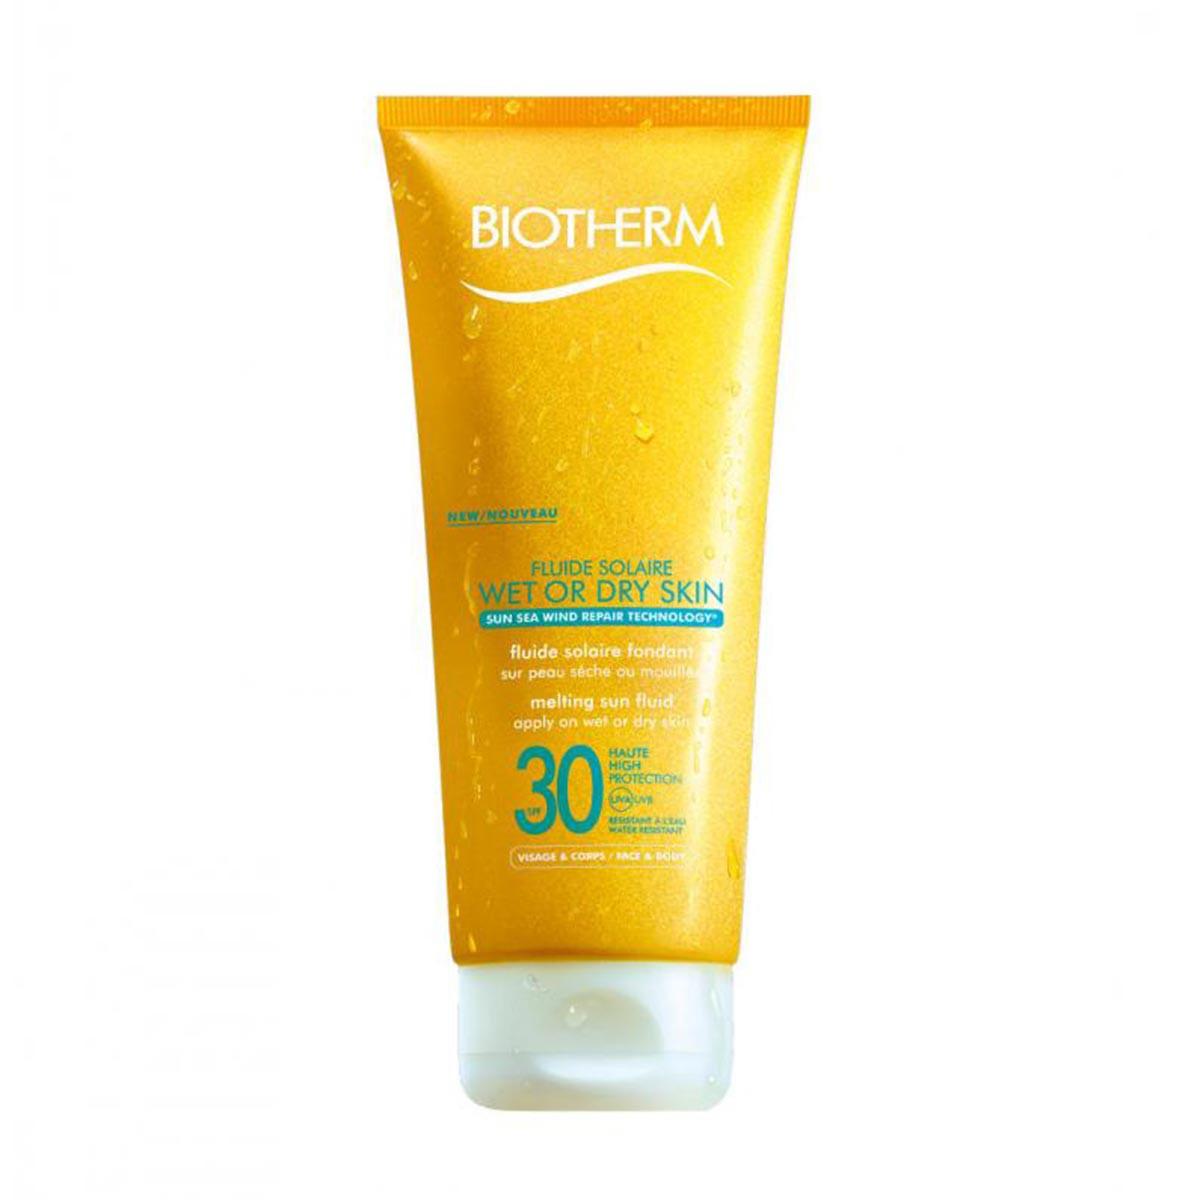 biotherm-fluide-solaire-wet-or-dry-skin-spf30-200ml-protector